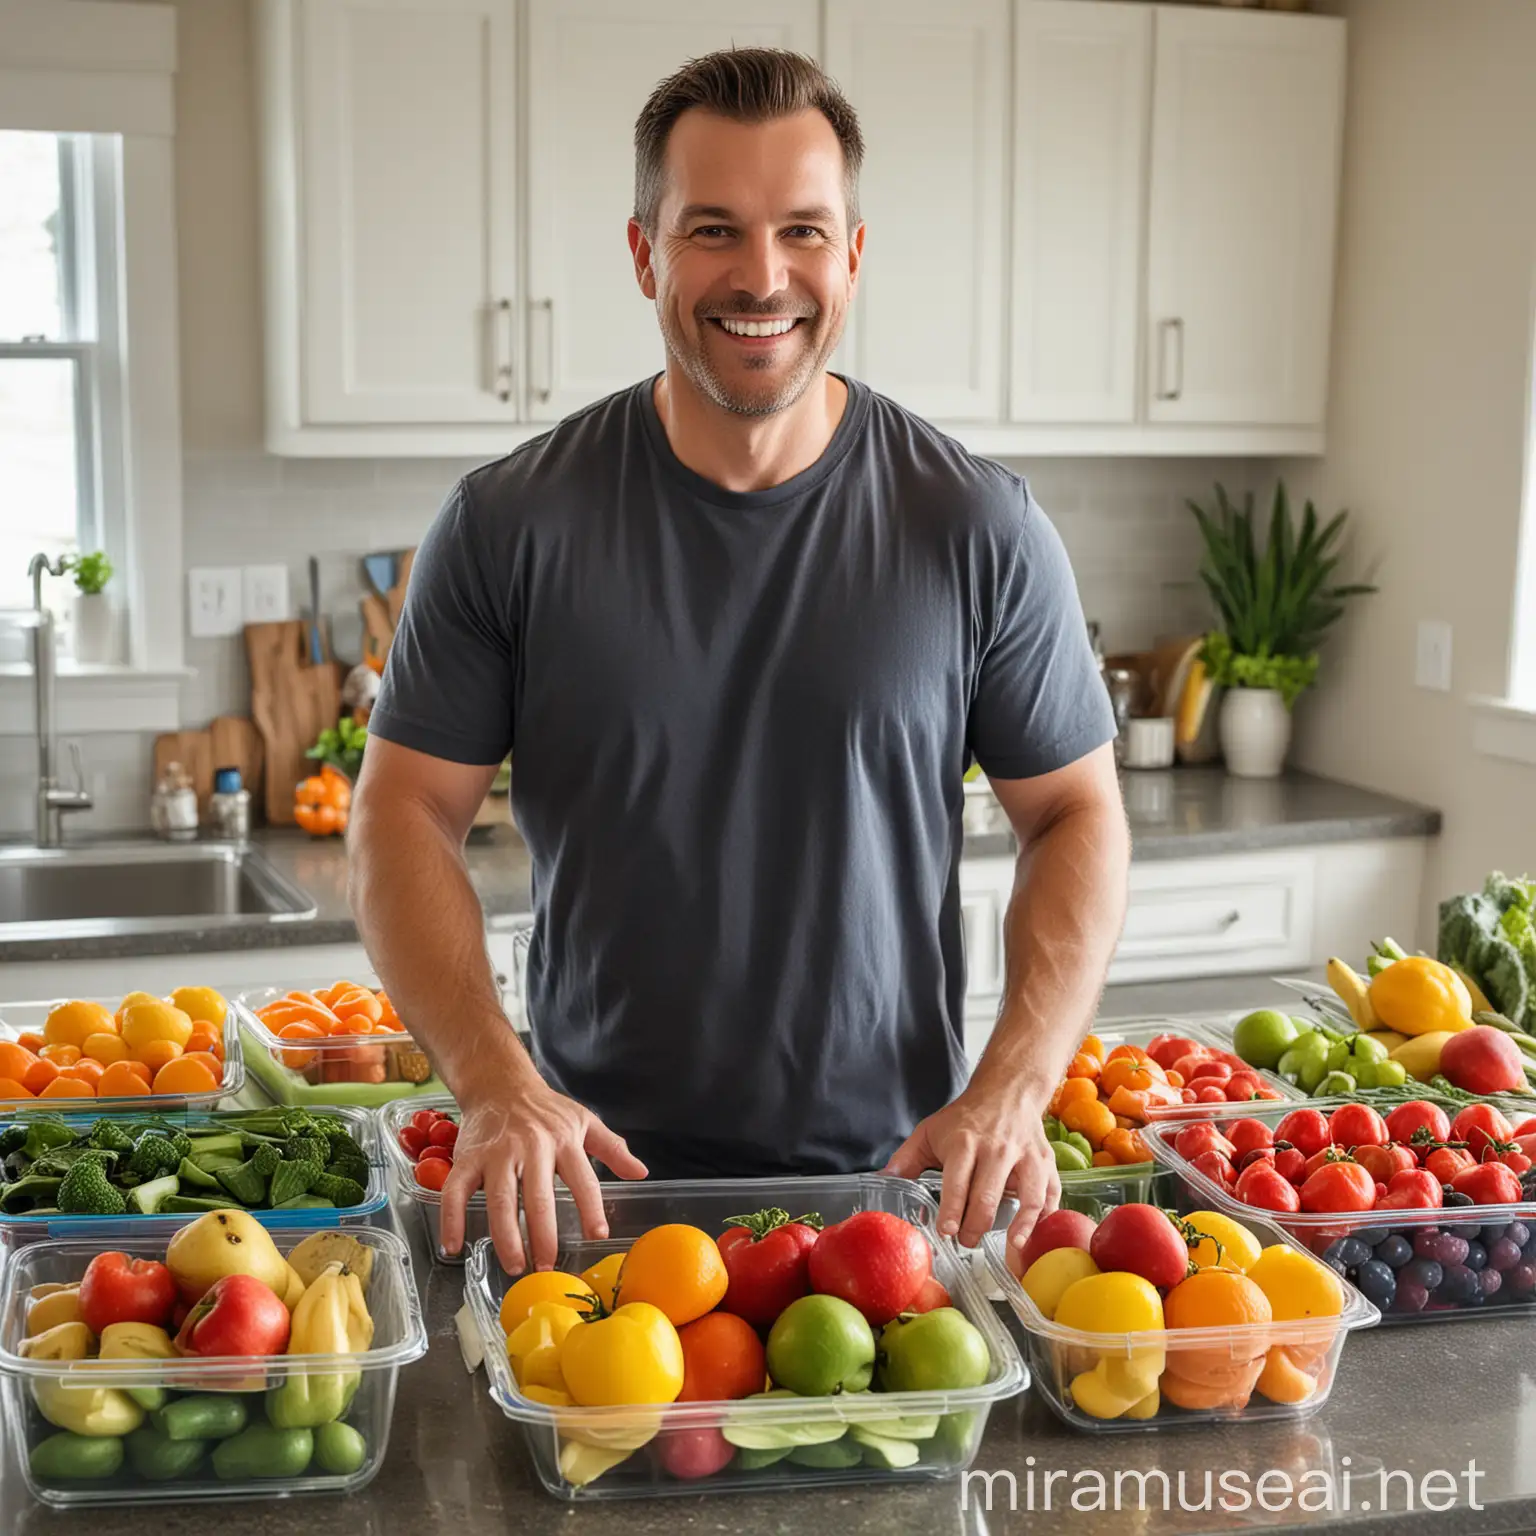 A busy dad stands in his kitchen surrounded by colorful fruits, vegetables, and meal prep containers. He's smiling as he portions out nutritious meals for the week, showcasing the ease and efficiency of meal prepping.